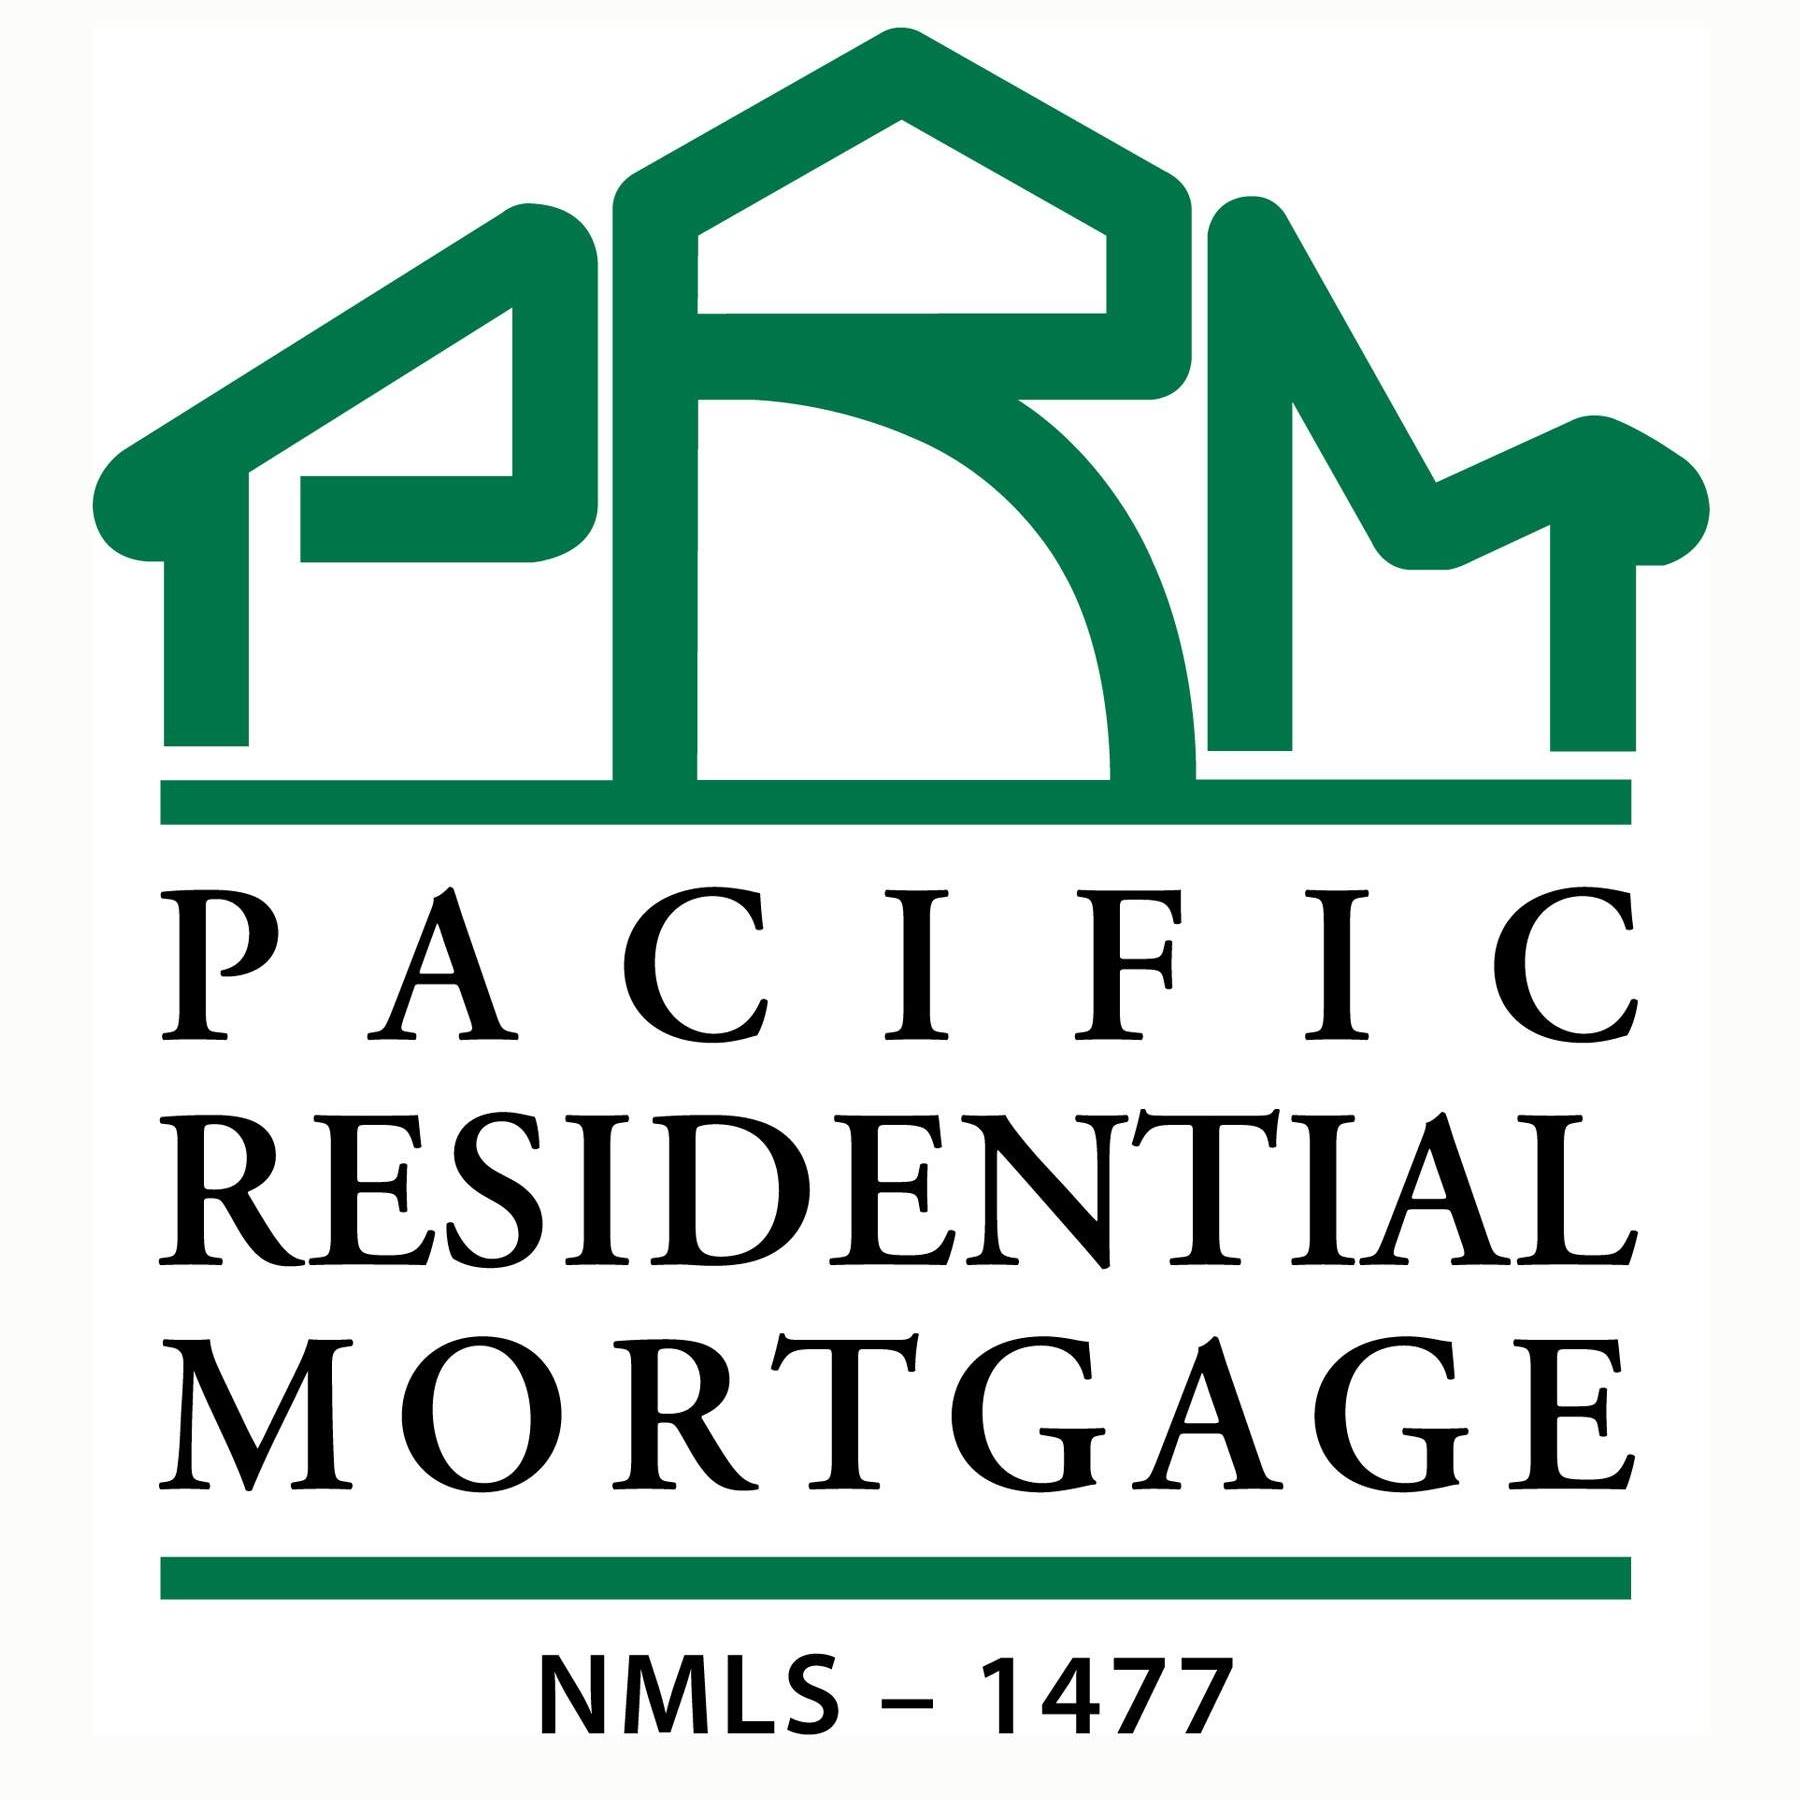 Pacific Residential Mortgage